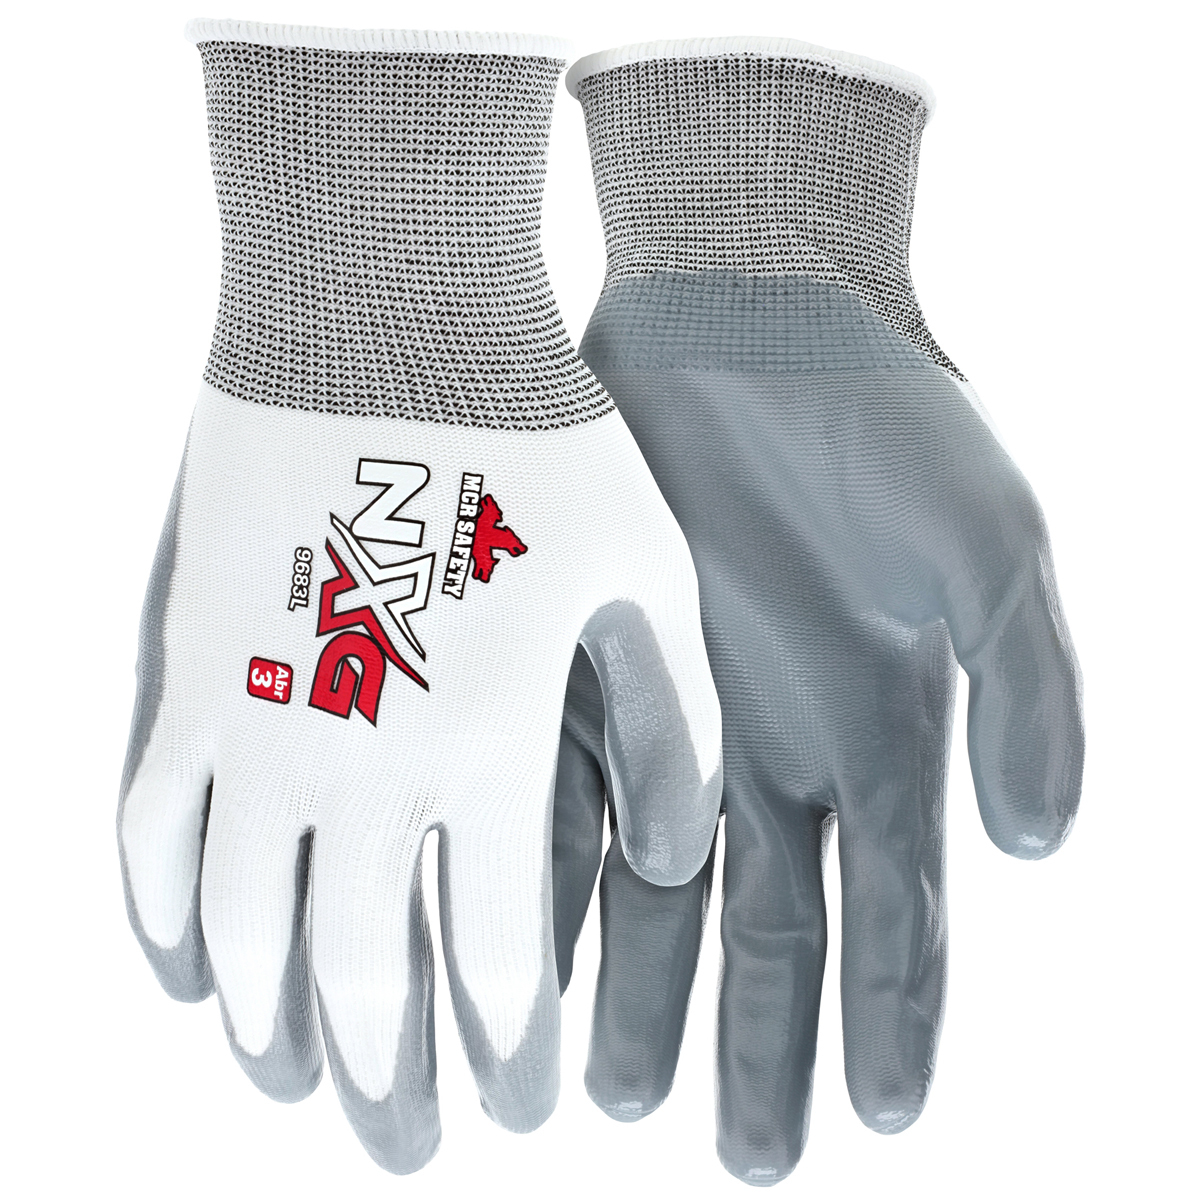 MCR Safety® Medium UltraTech® 15 Gauge Gray Nitrile Palm And Fingertips Coated Work Gloves With White Nylon Liner And Knit Wrist